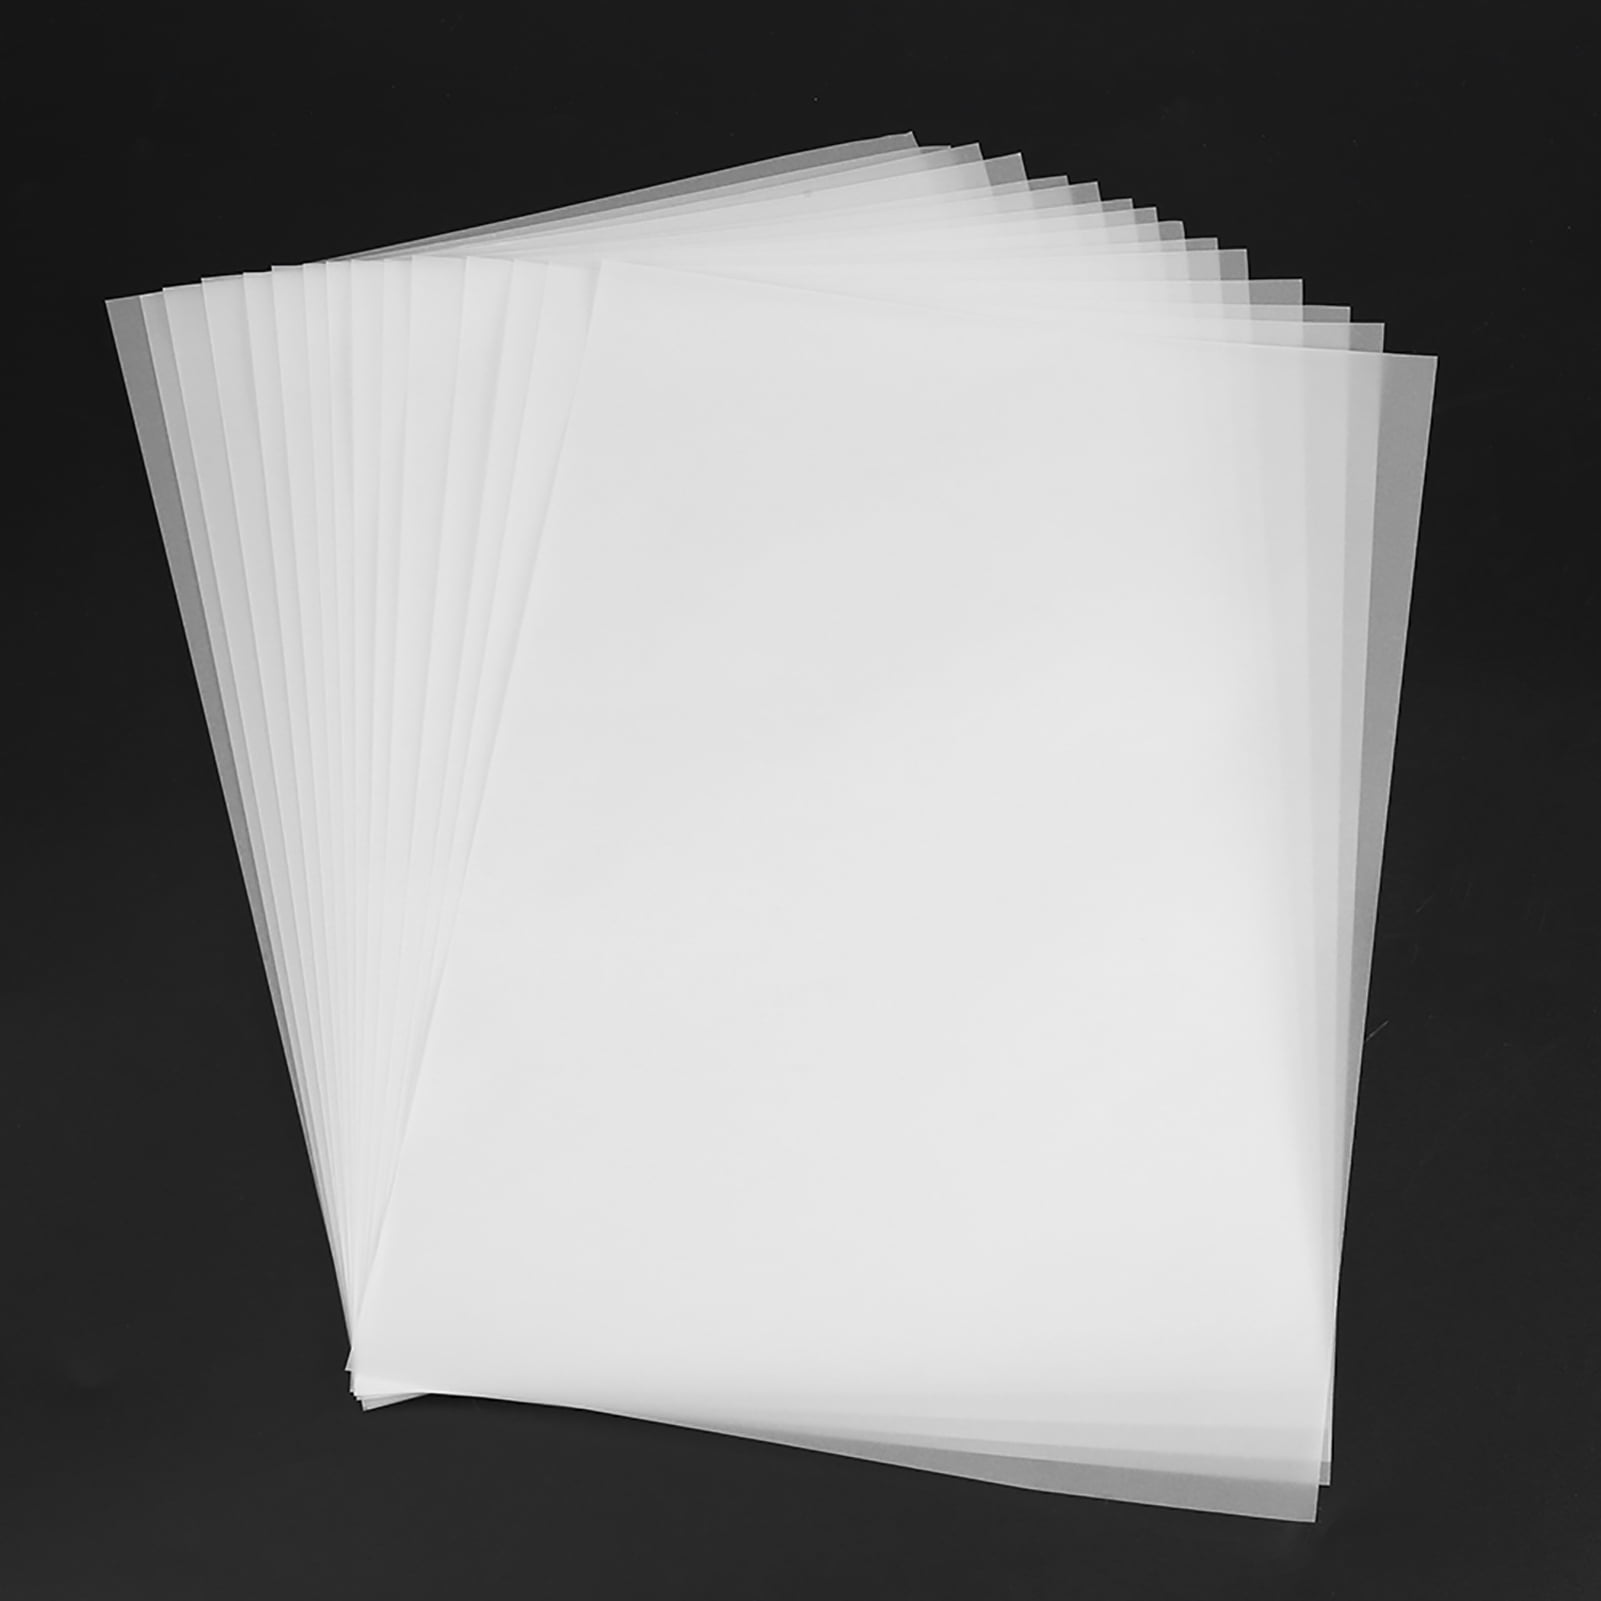 193,125 Tracing Paper Images, Stock Photos, 3D objects, & Vectors